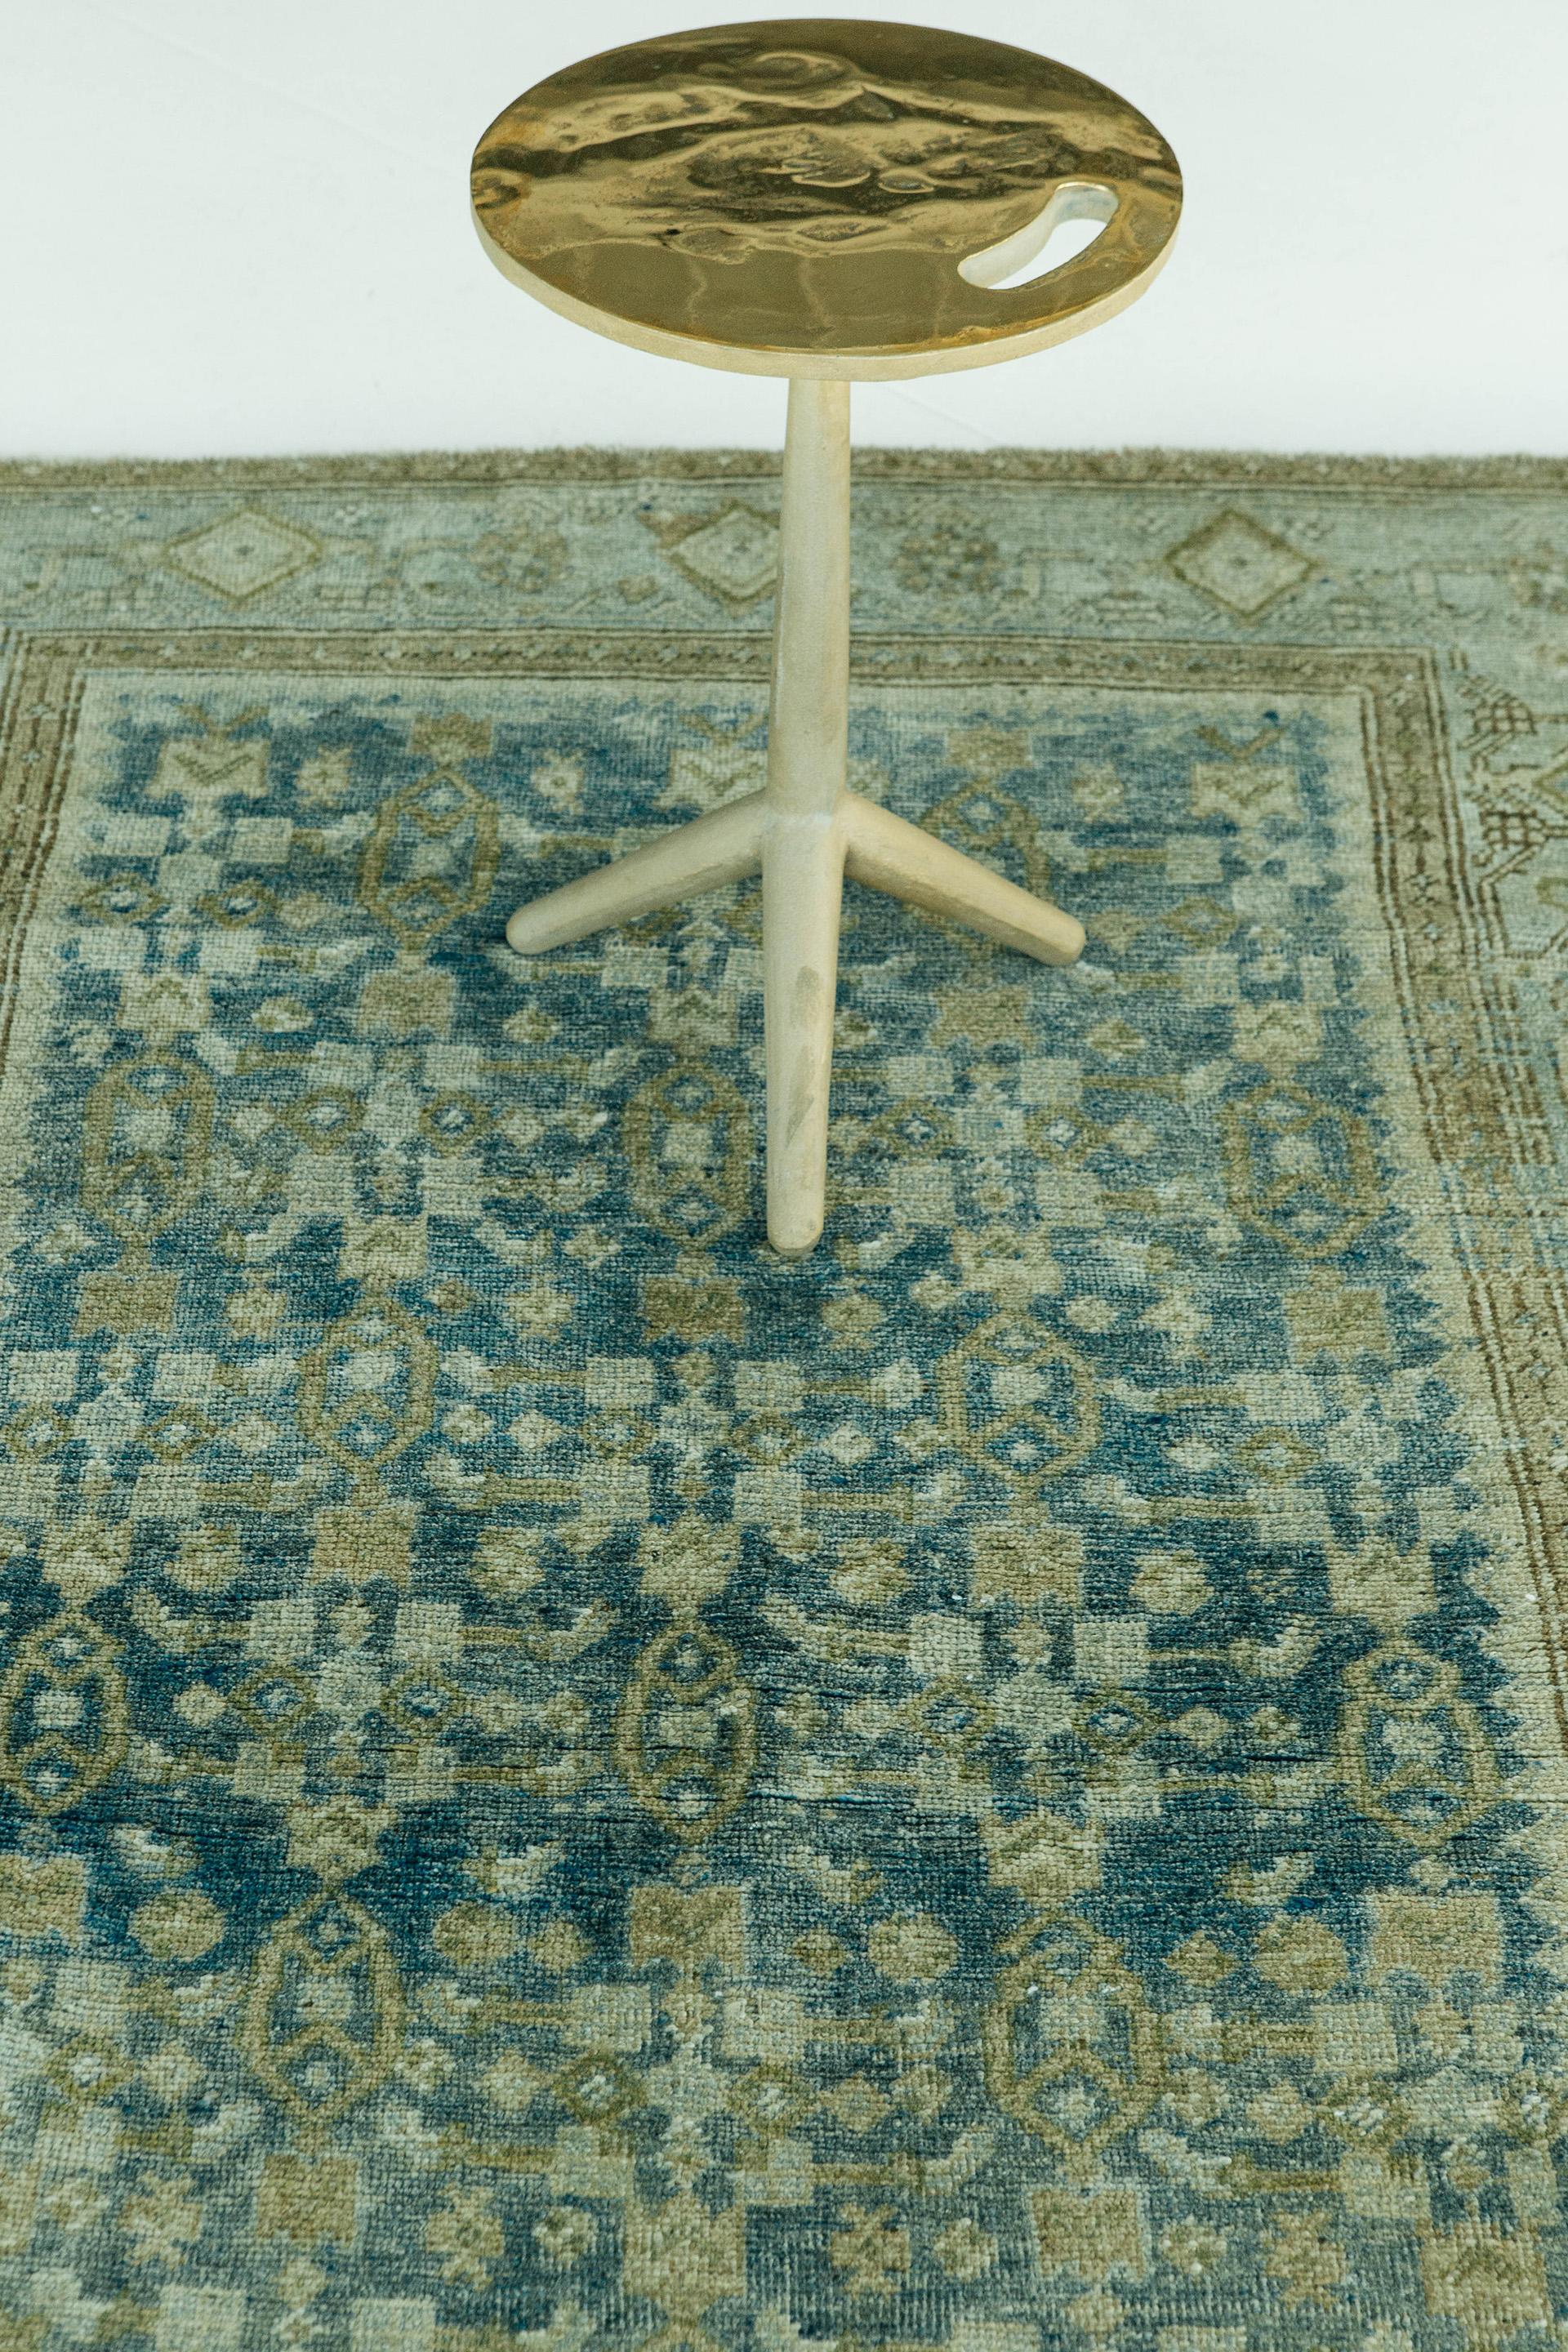 Field of teal Abrash with pale umber and ivory all-over geometric motifs. The composition is framed by a border of large scale geometric elements and stylized rosettes in grisaille tones on a turquoise ground.

Rug number: 27201
Size: 3'11